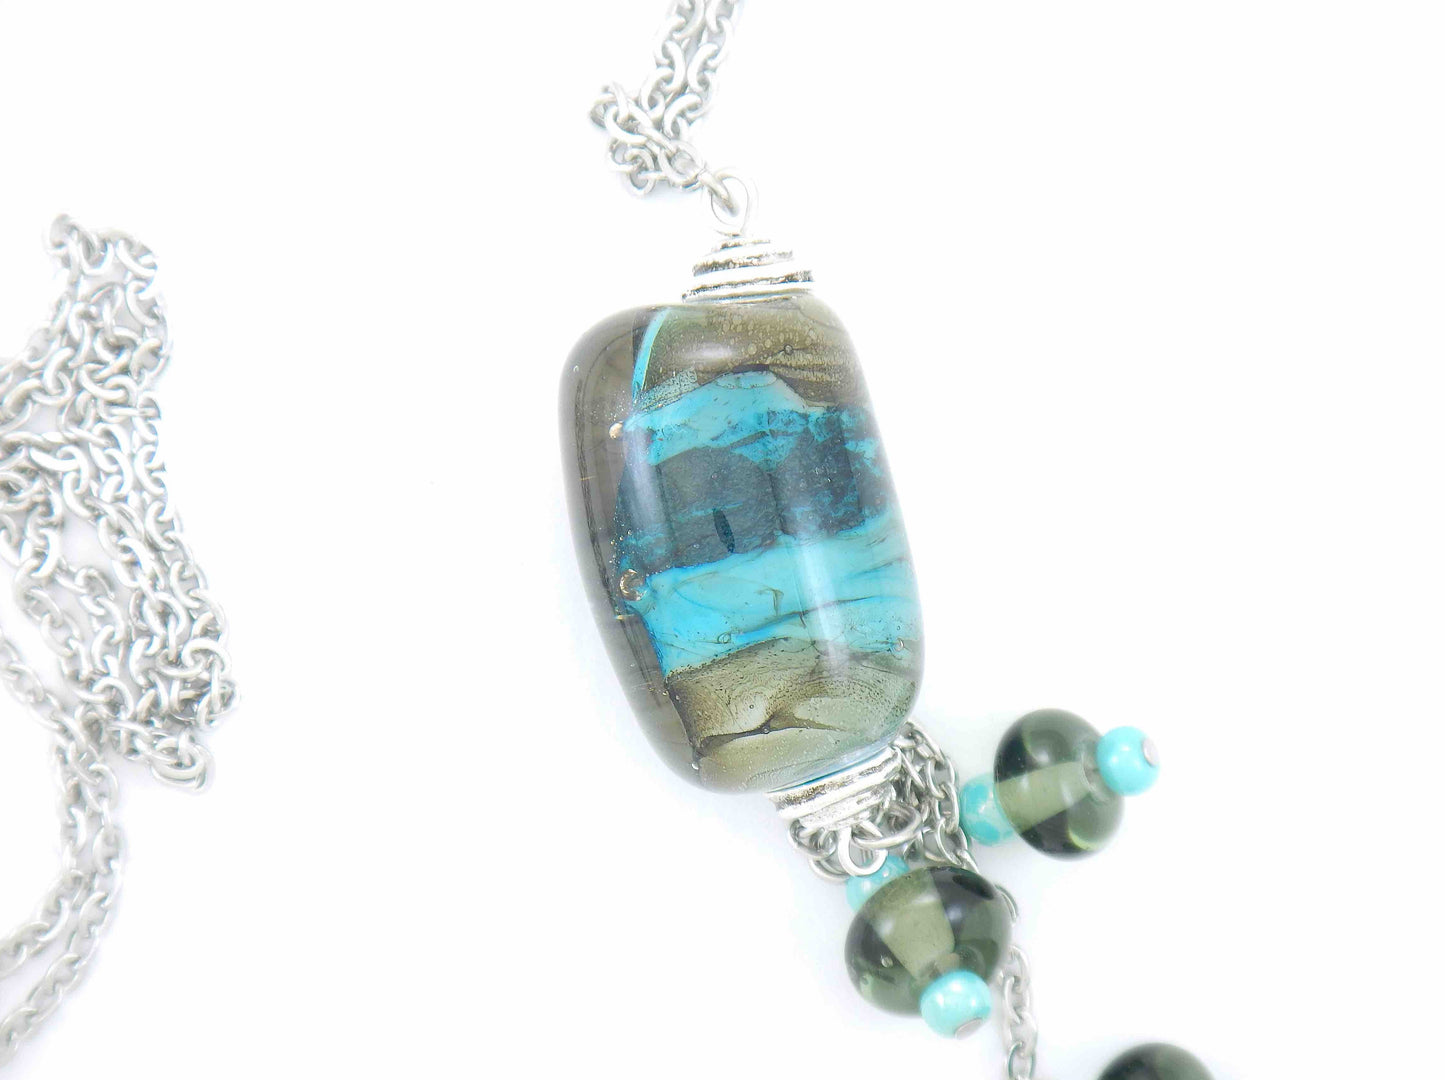 28-inch necklace with funky cylinder, dark turquoise-gray marbled pattern (Murano-style glass handmade in Montreal), matching pendants, stainless steel chain